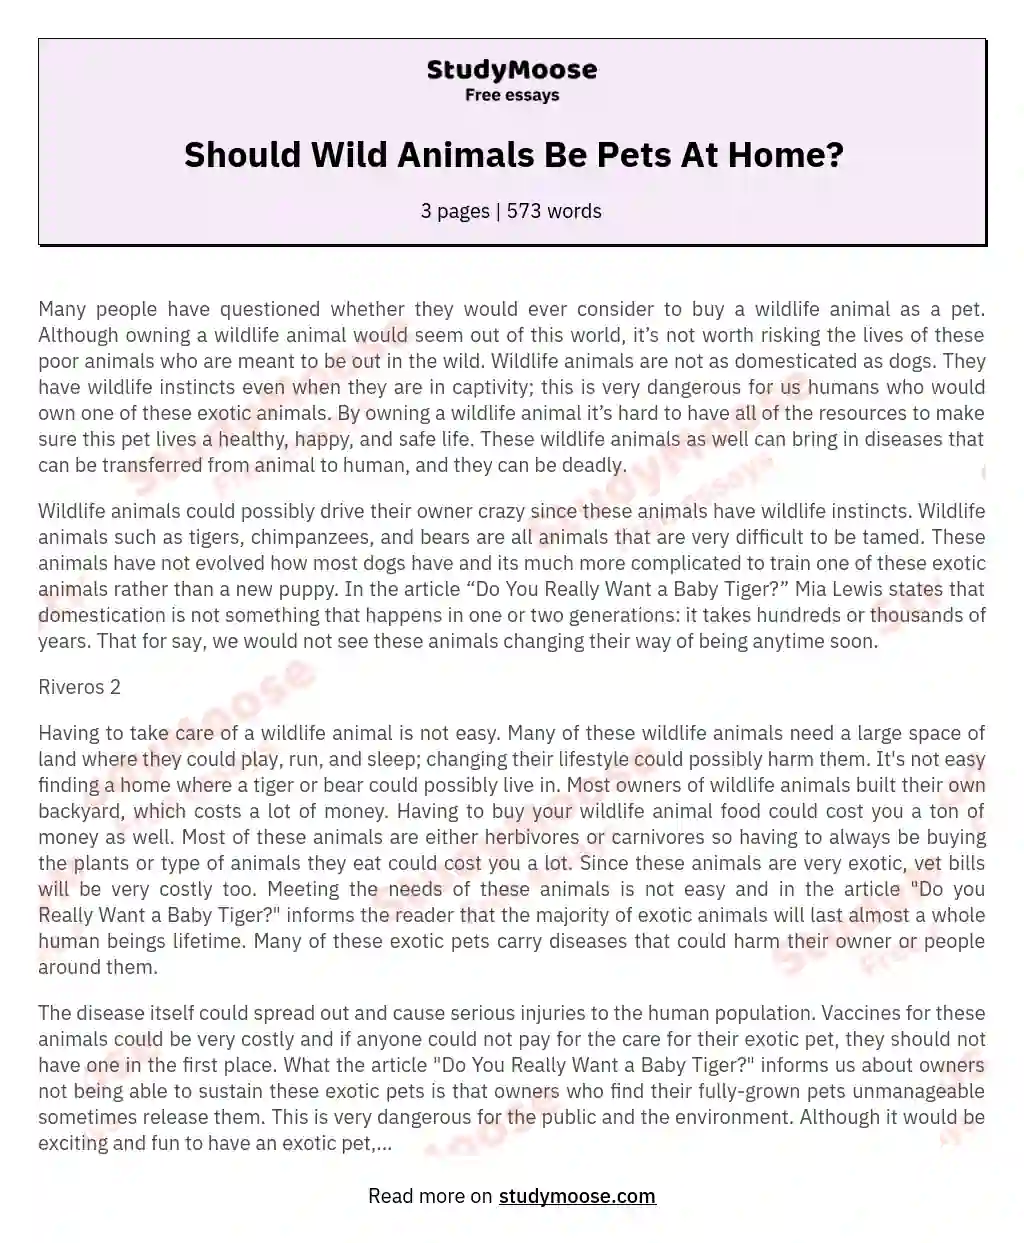 Should Wild Animals Be Pets At Home?